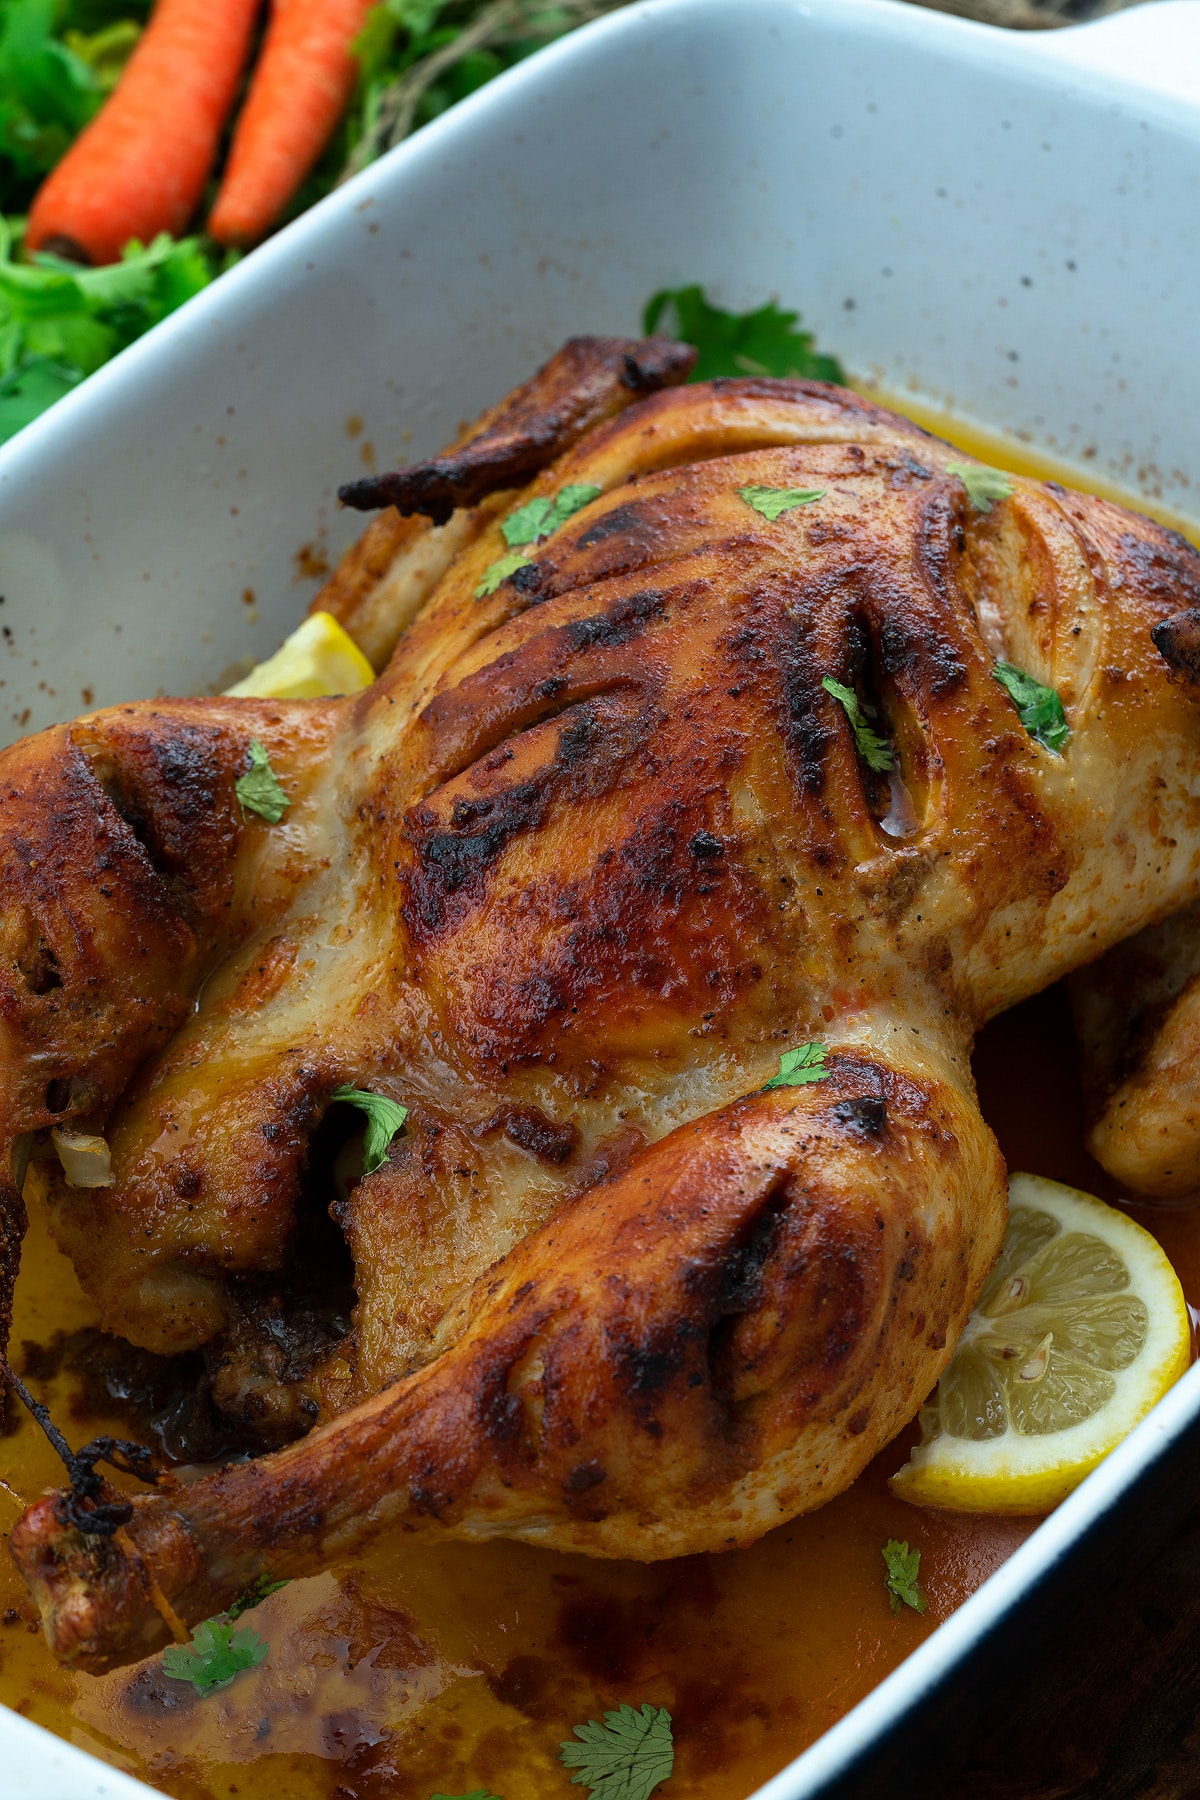 Whole roasted chicken in a white ceramic baking tray with lemon slices